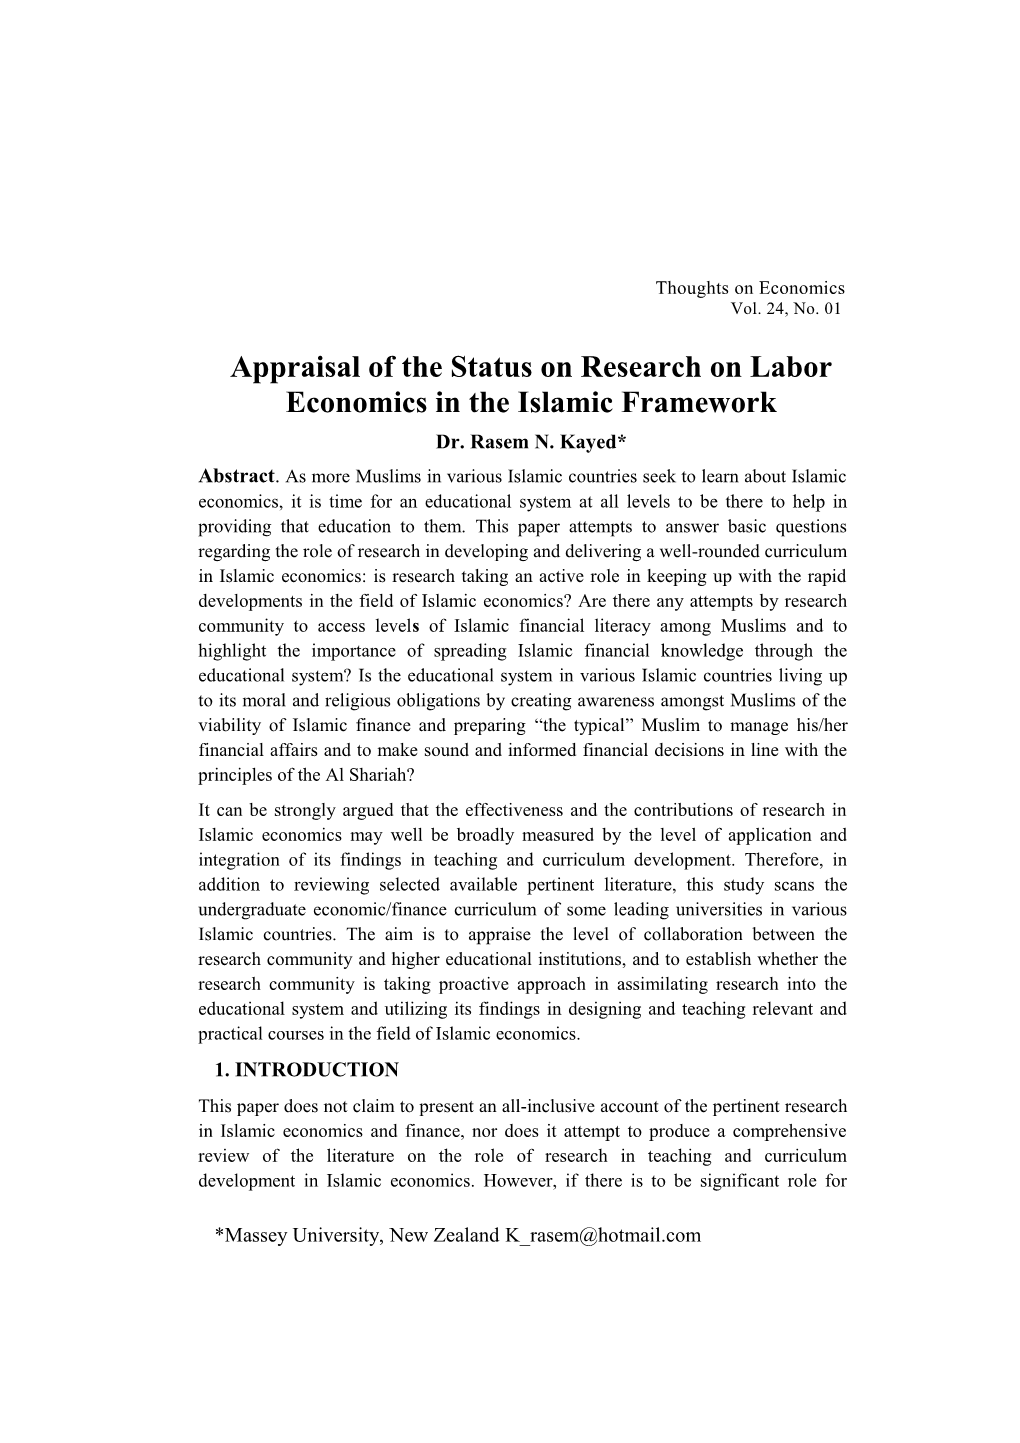 Appraisal of the Status on Research on Labor Economics in Theislamic Framework